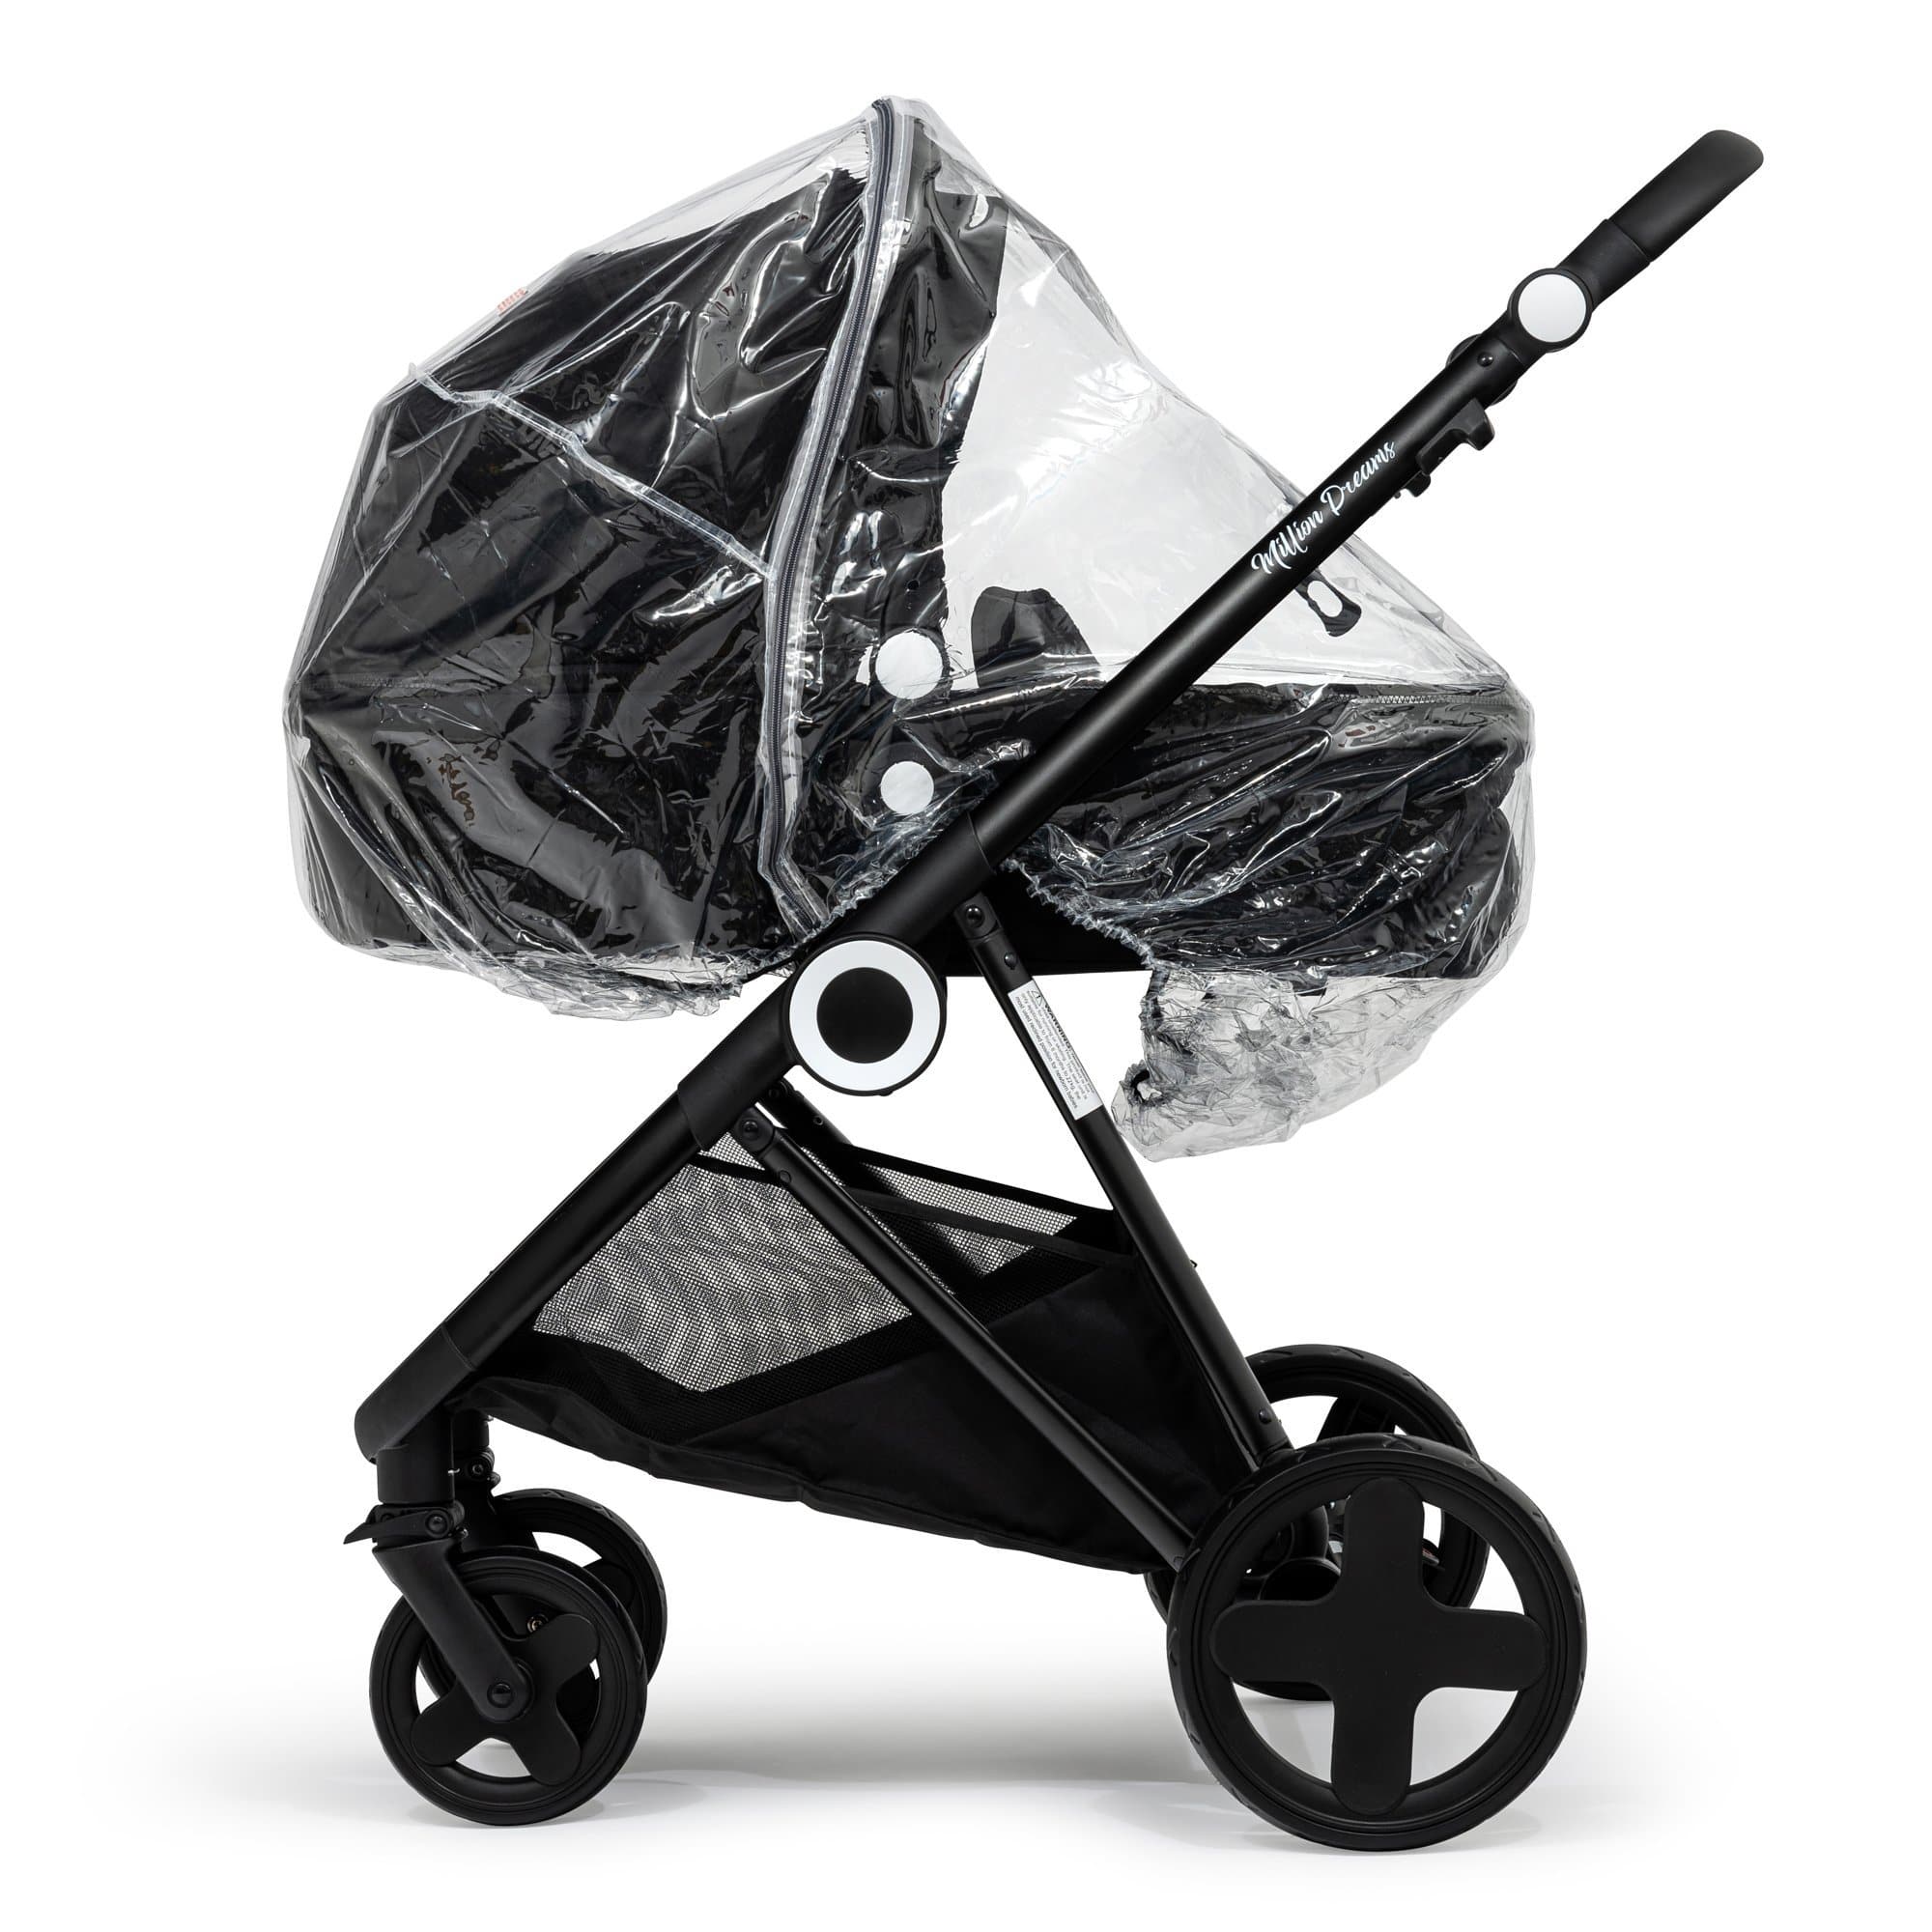 2 in 1 Rain Cover Compatible with Nania - Fits All Models - For Your Little One